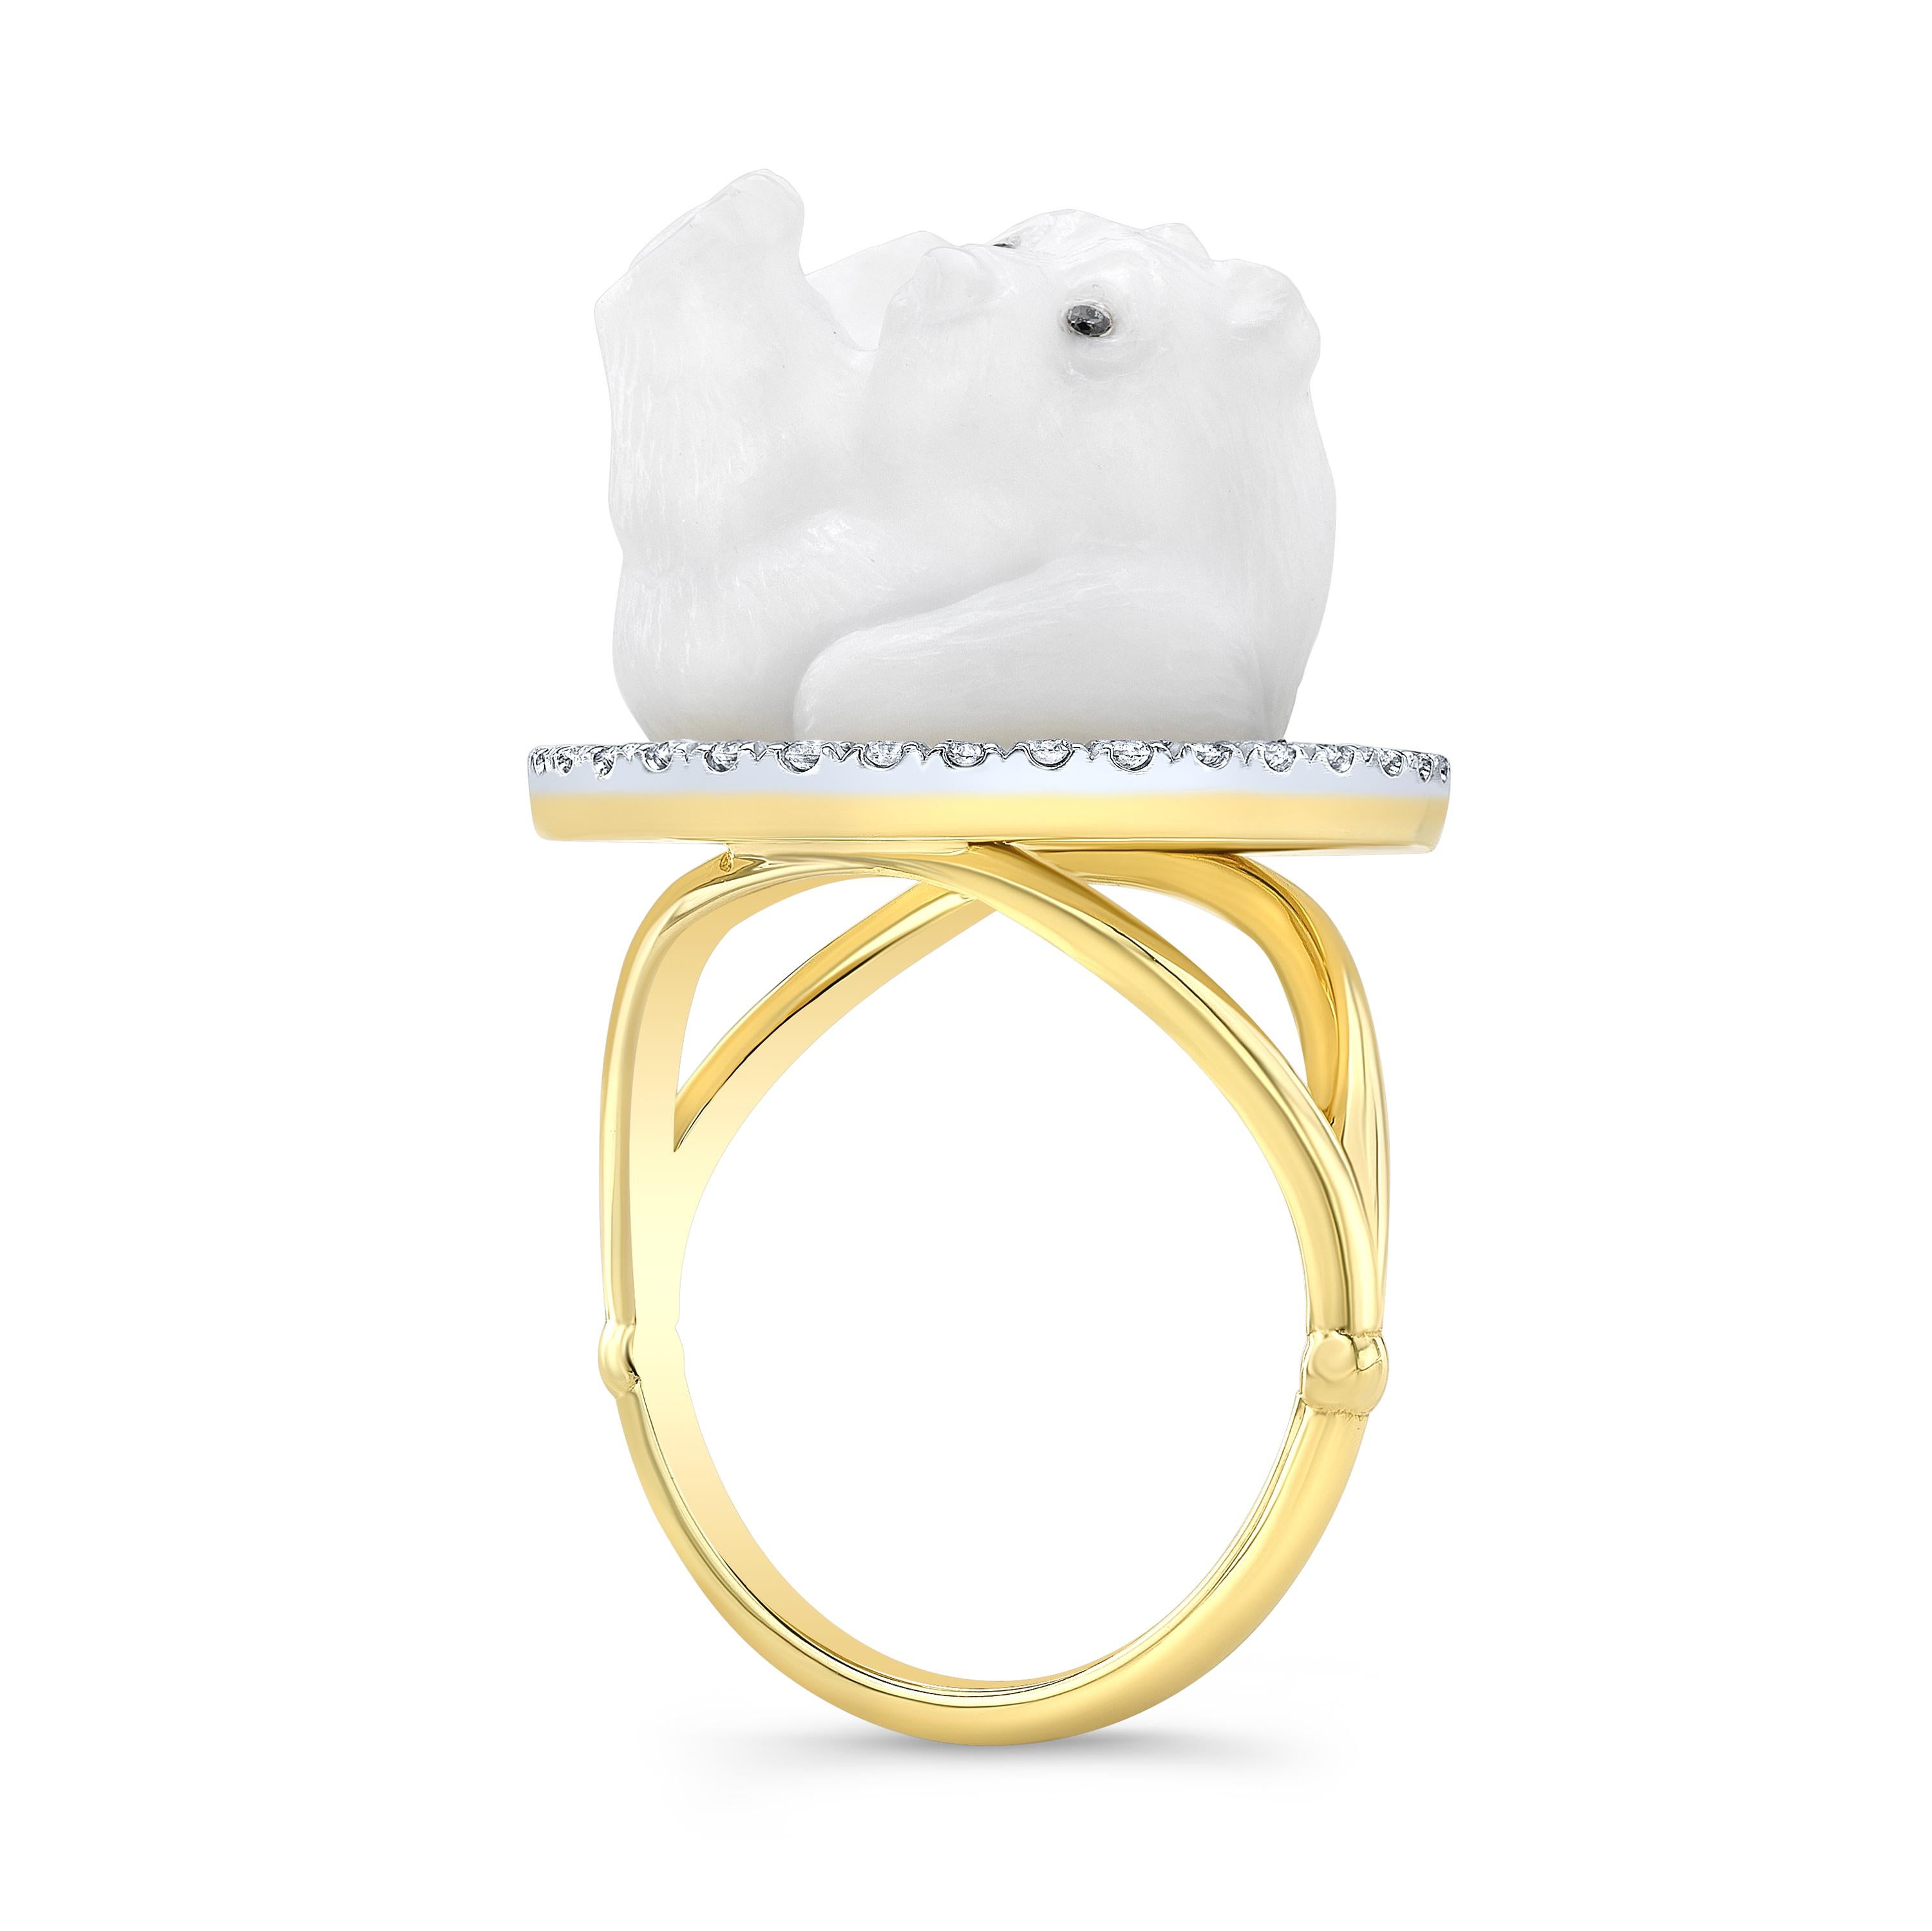 Amy Y's 18K gold, diamond, and contemporary opal ring 'Arctic Bear' is a classic one-of-a-kind jewel.  Finding new ways to capture the wonders of the natural world of wild animals, Amy has worked to design a darling bear recreated in carved opal;